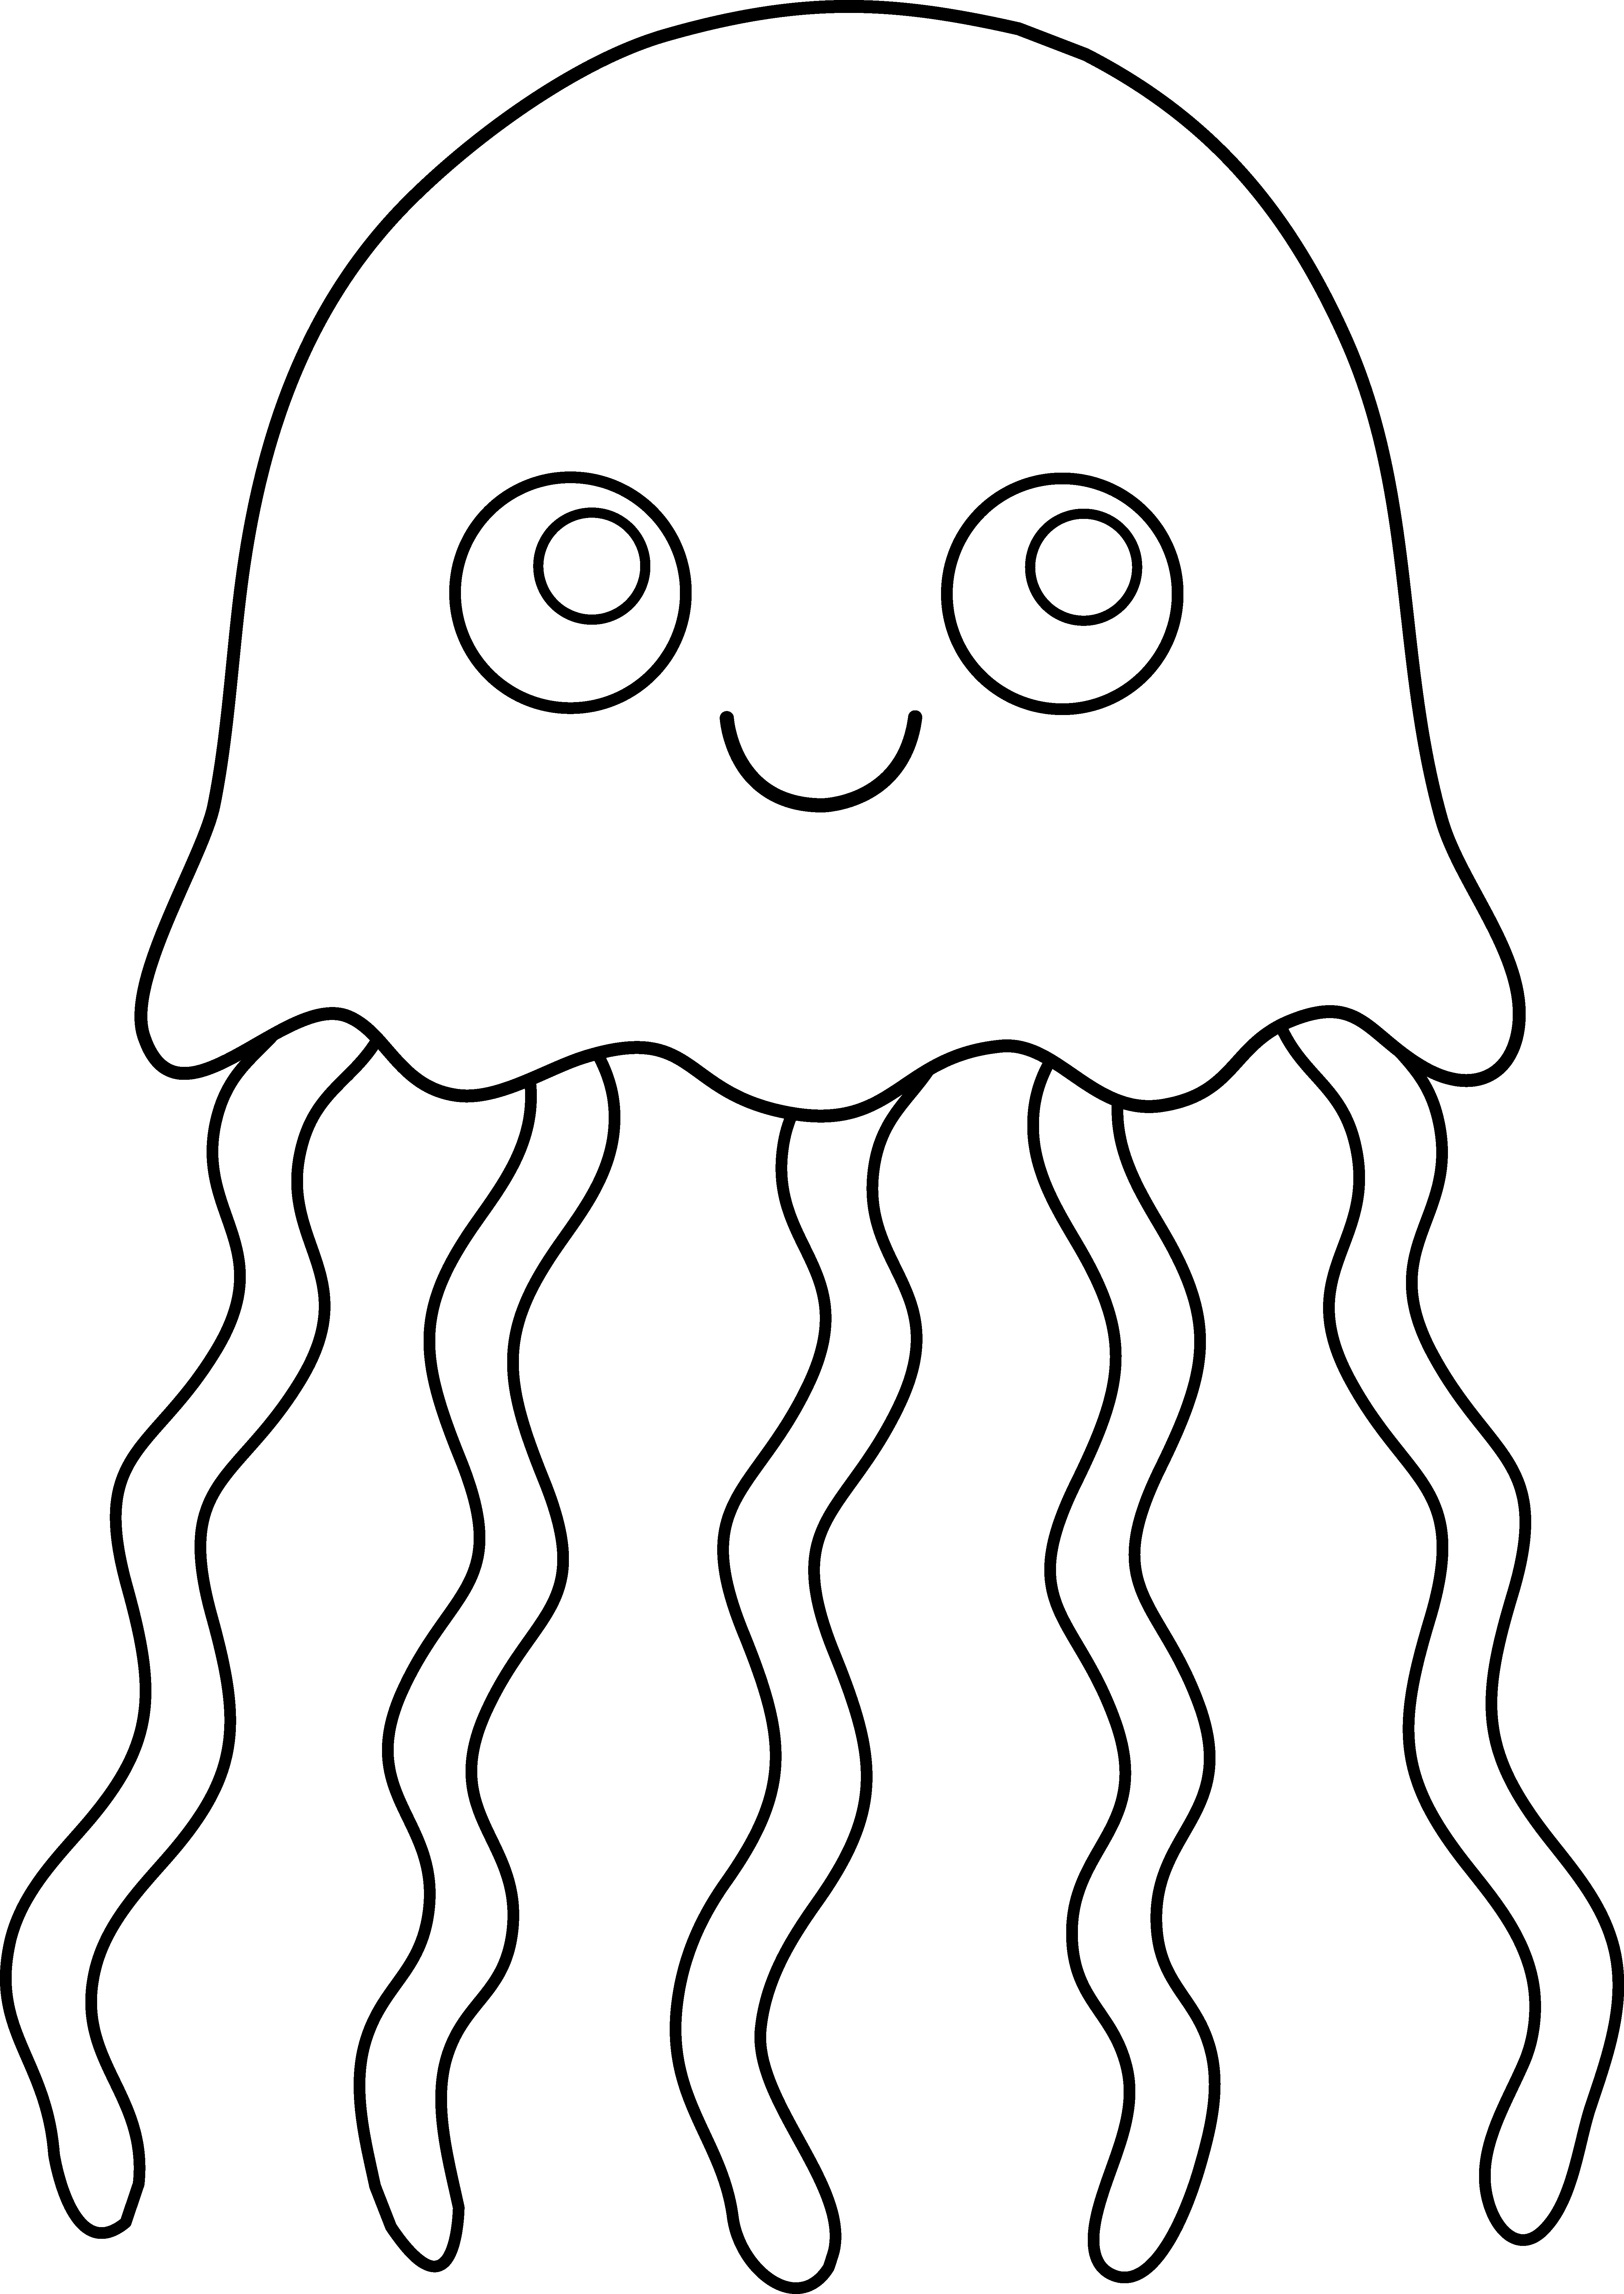 Jellyfish Clip Art Black and White Coloring Page